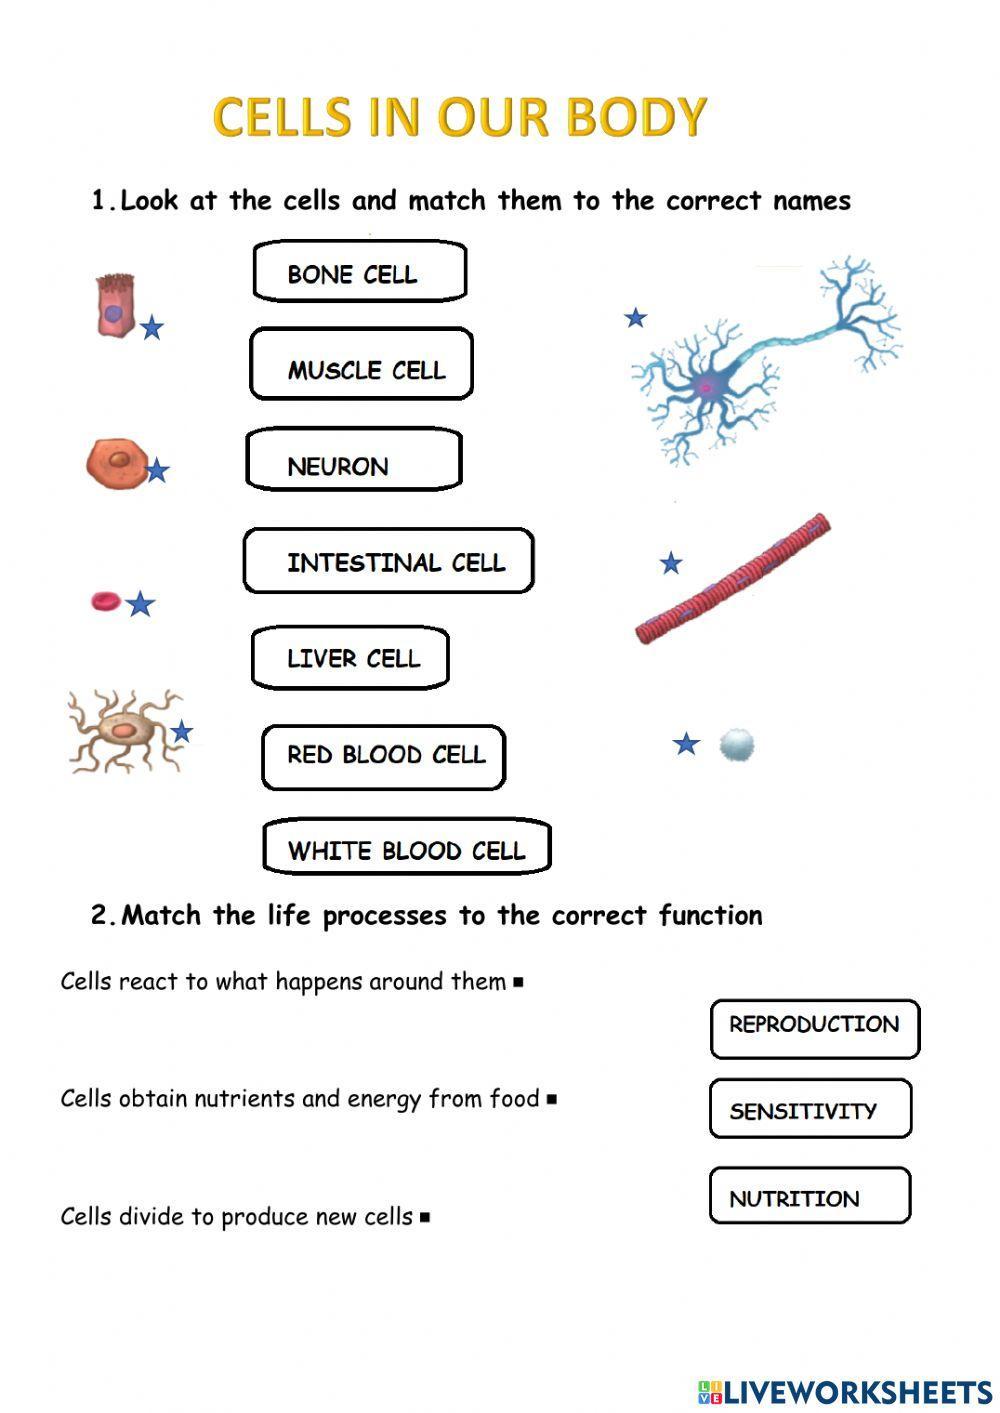 Types of cells